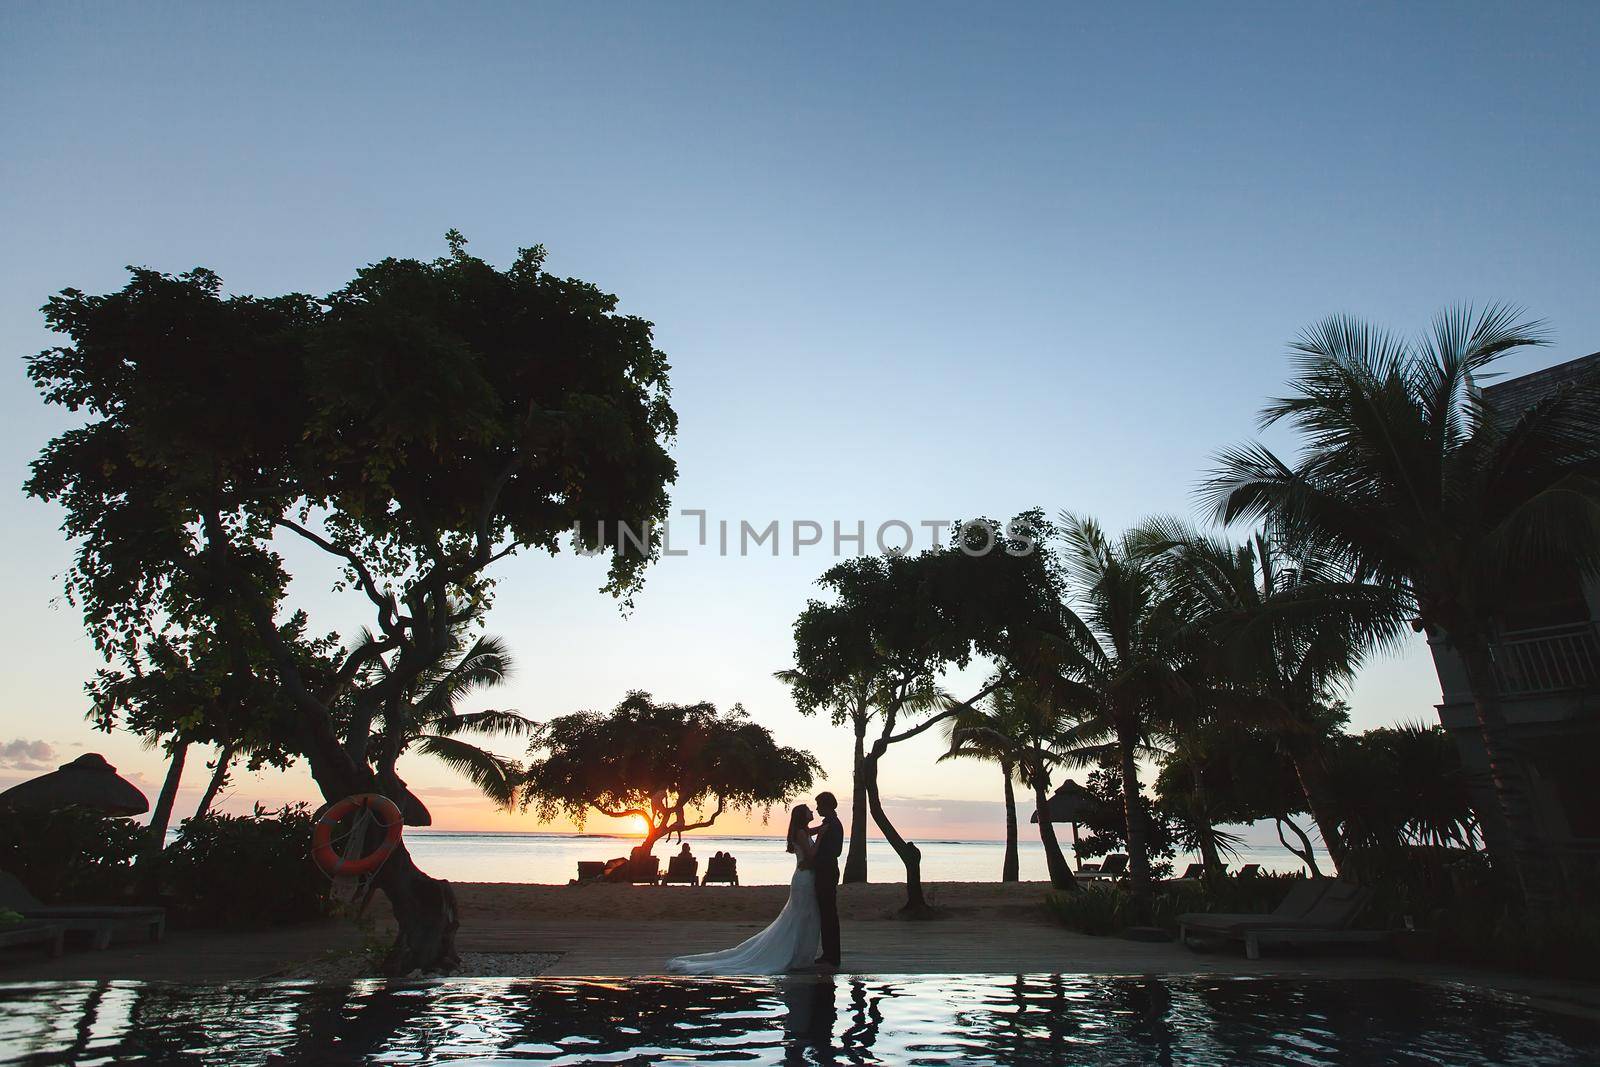 Silhouettes of the bride and groom at sunset. The reflection in the pool. by StudioPeace